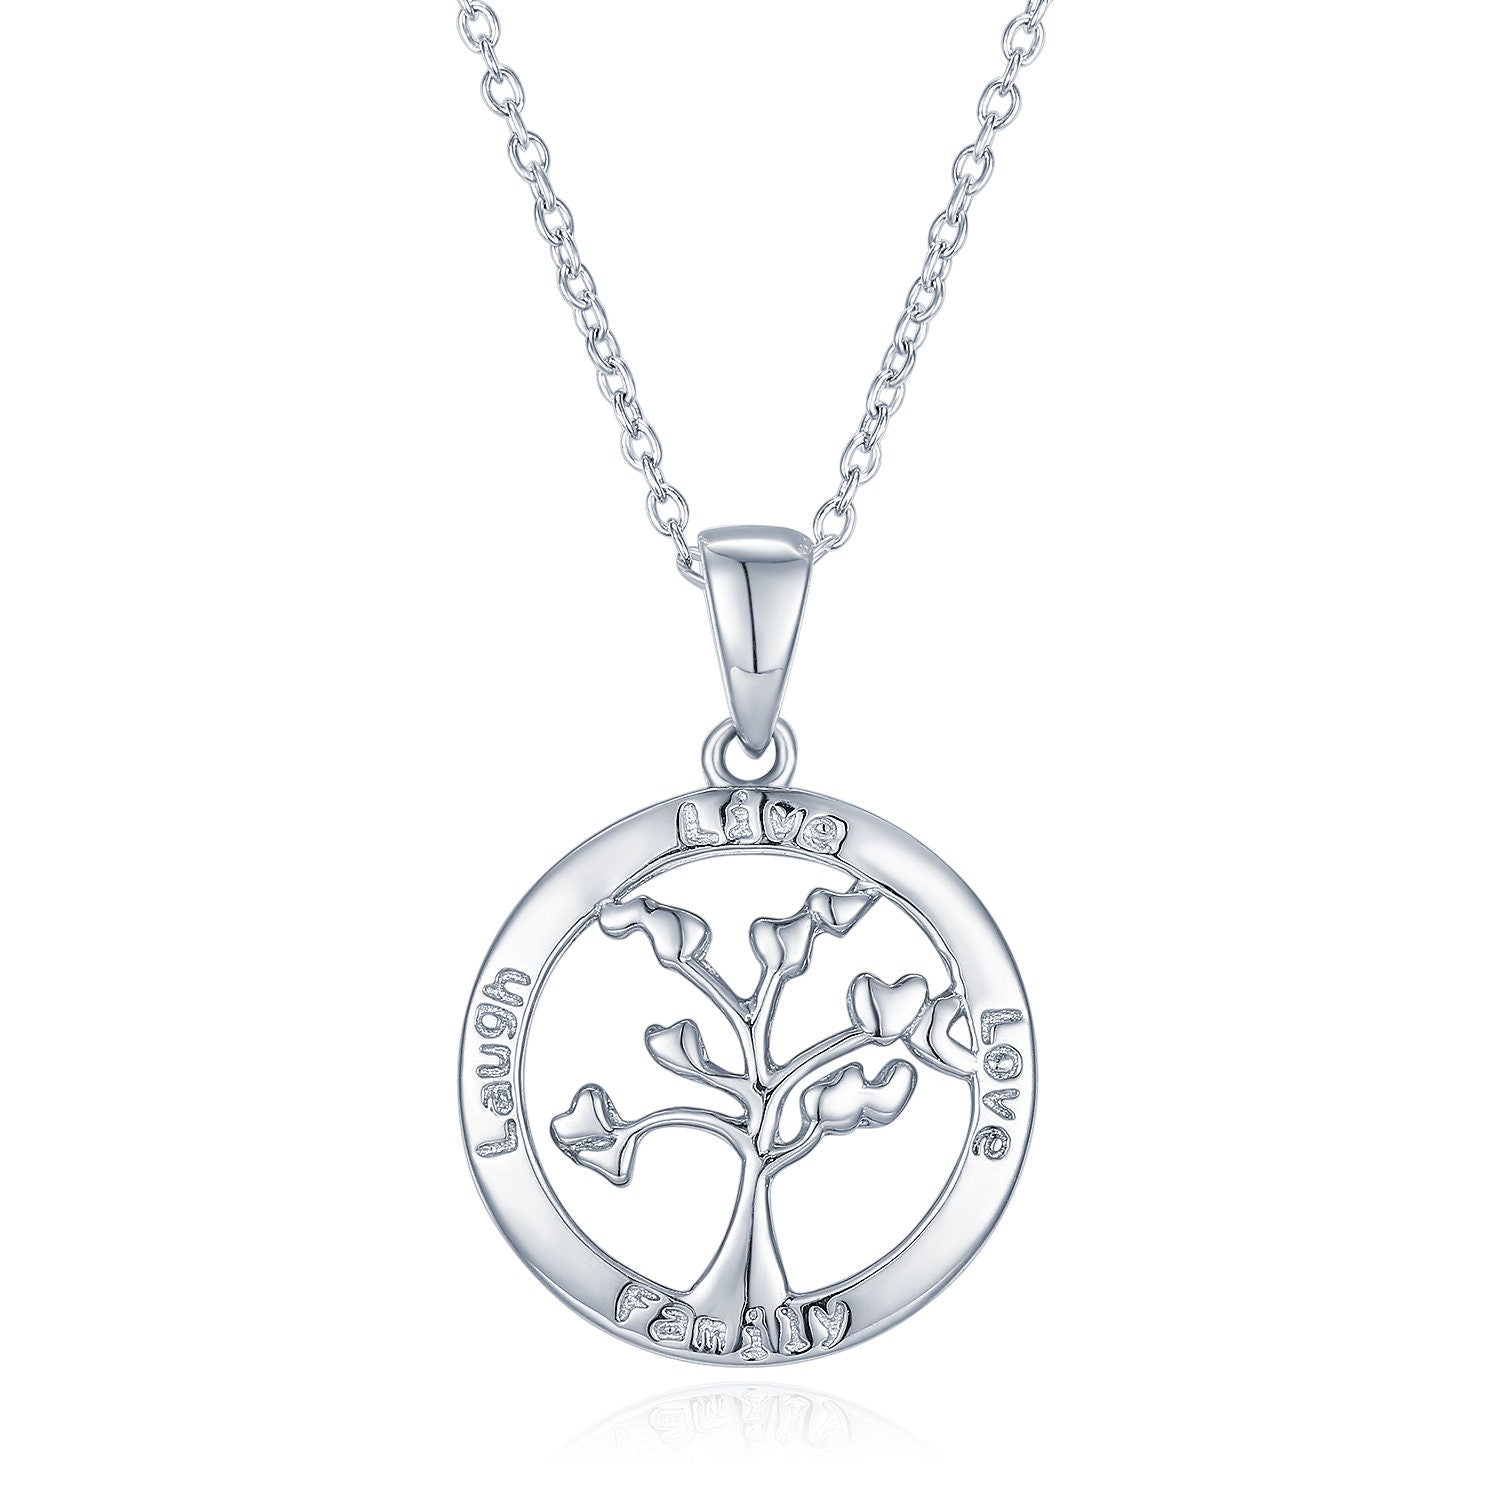 Sterling Silver Tree Of Life Necklace, Necklaces For Women, Layering Necklaces, Minimalist Necklace, Dainty Necklace, Tree Of Life Jewellery